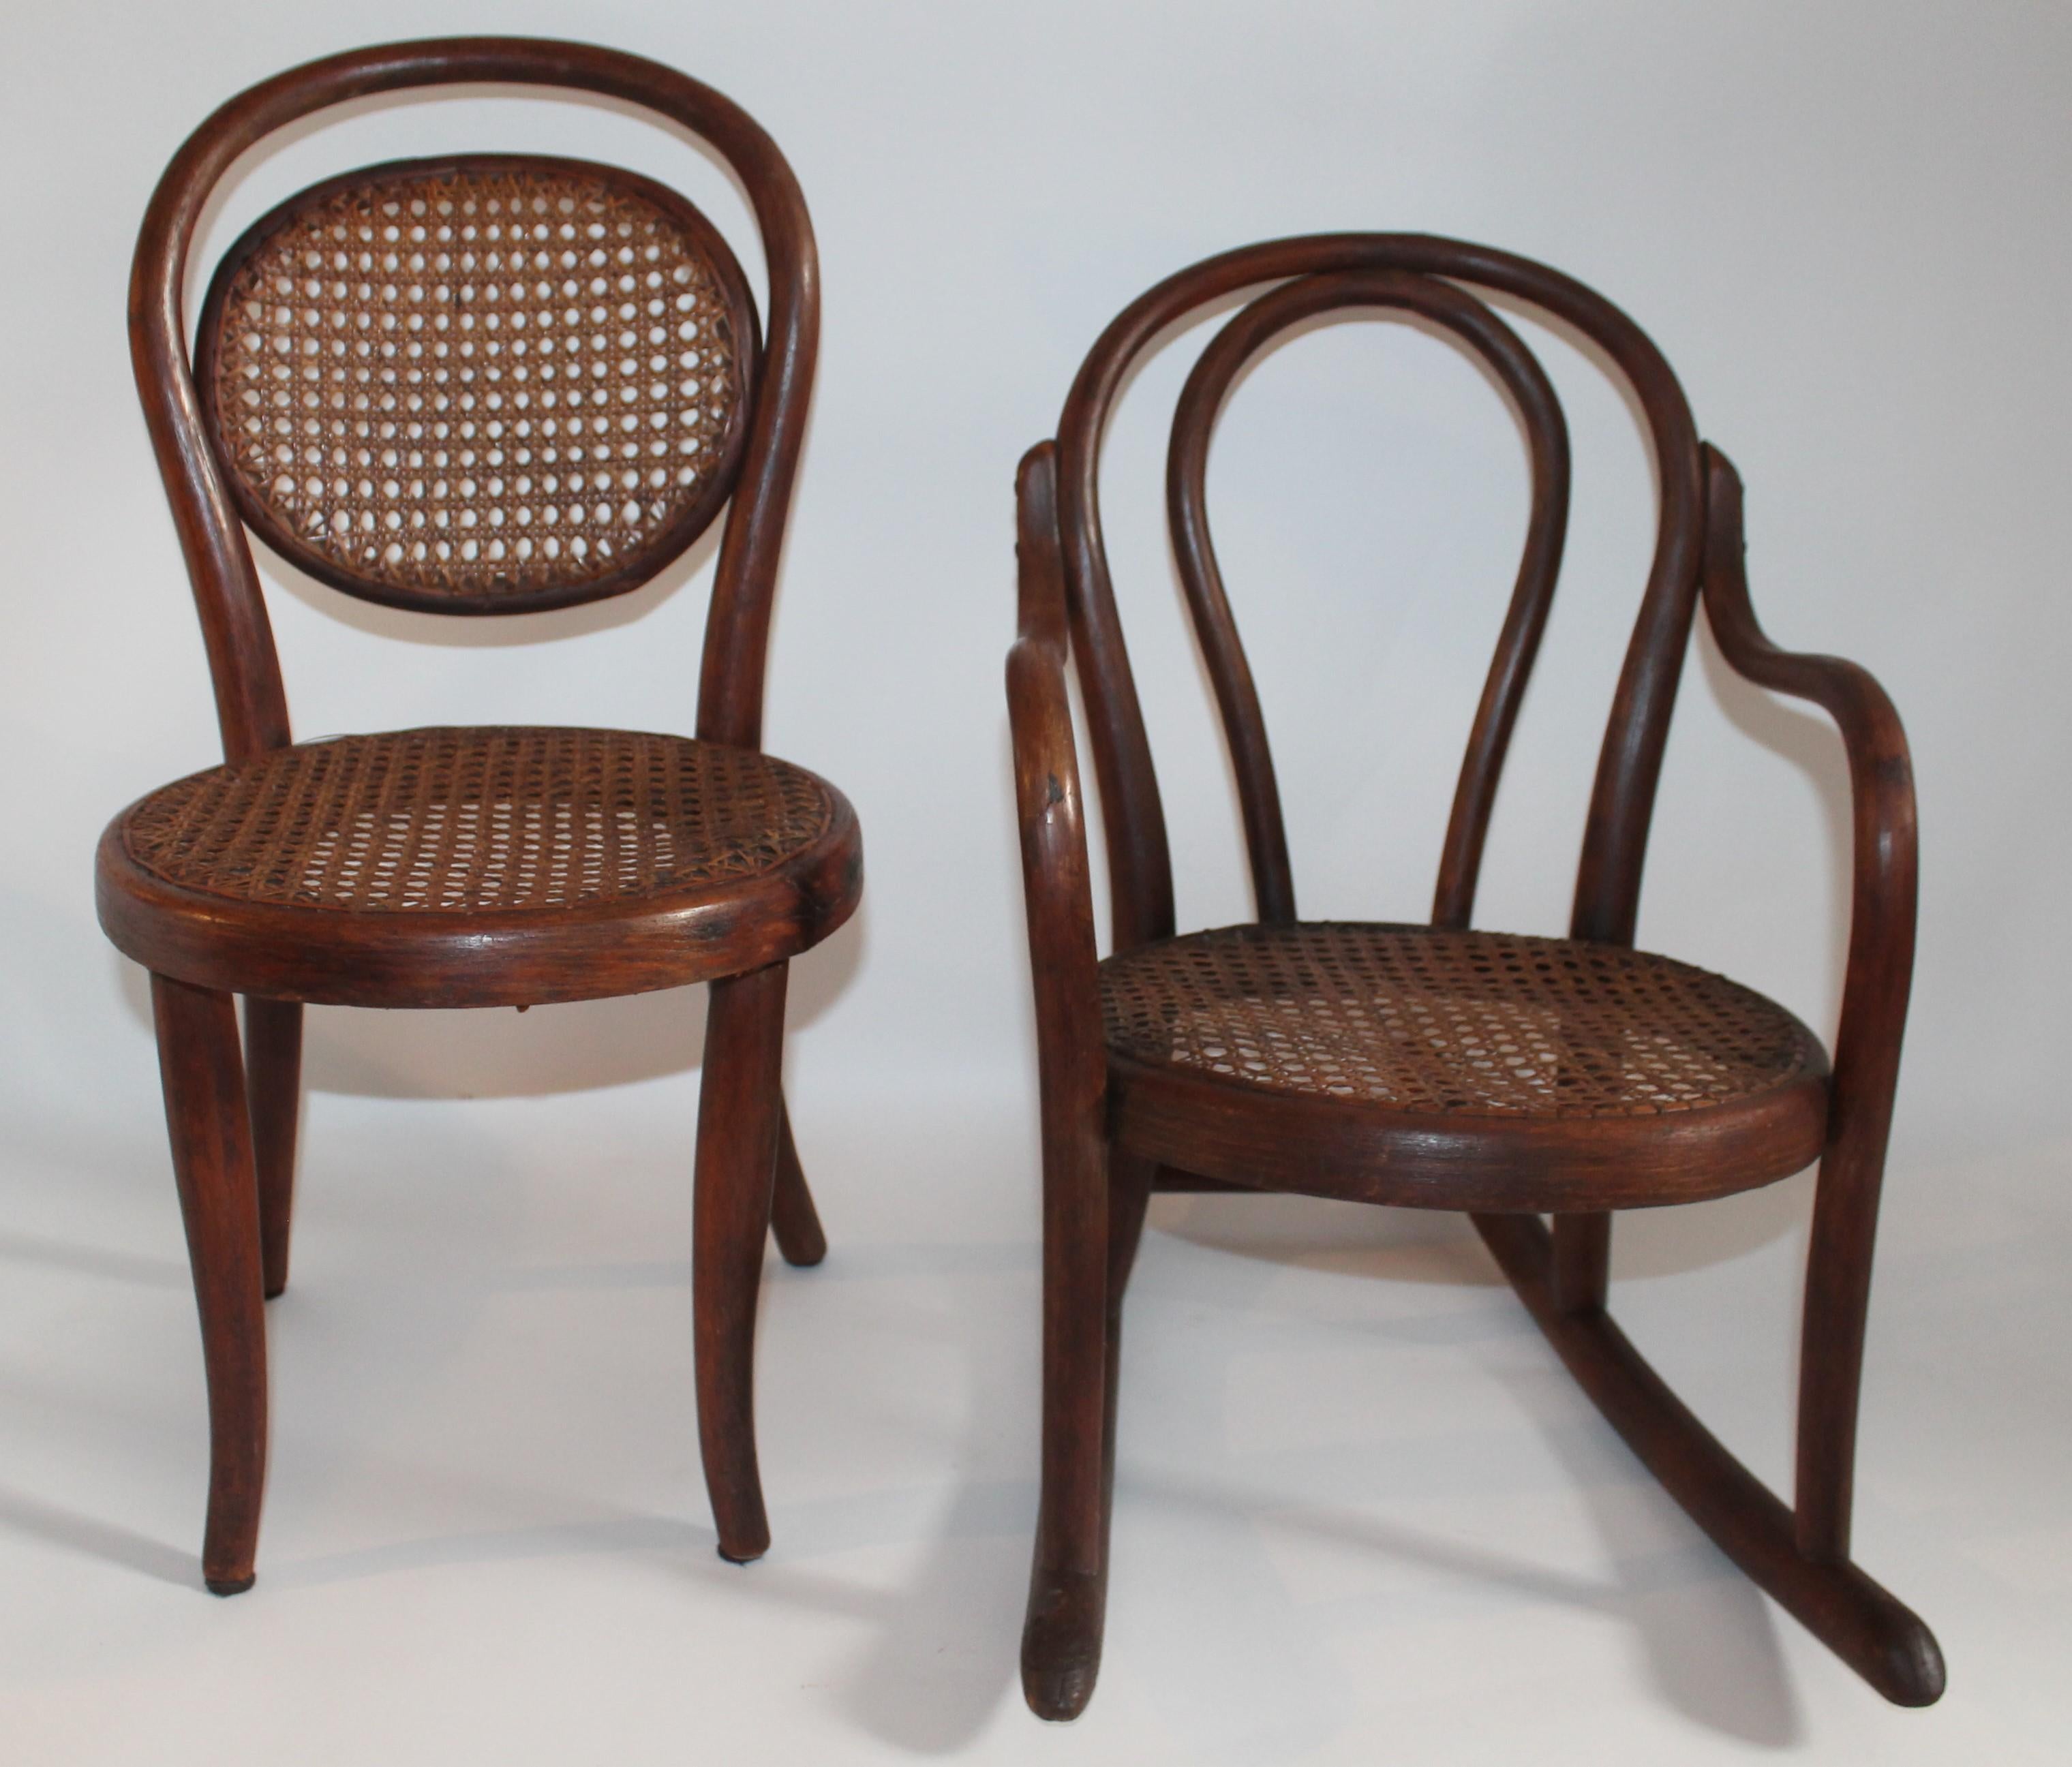 These two bentwood children's chair and bentwood rocking chair are in very good condition. Selling as a pair. All seats and backings are in strong and very good condition.

Tall Child's chairs measures -
25 H x 12 W x 15 D - 121.5s H

Child's